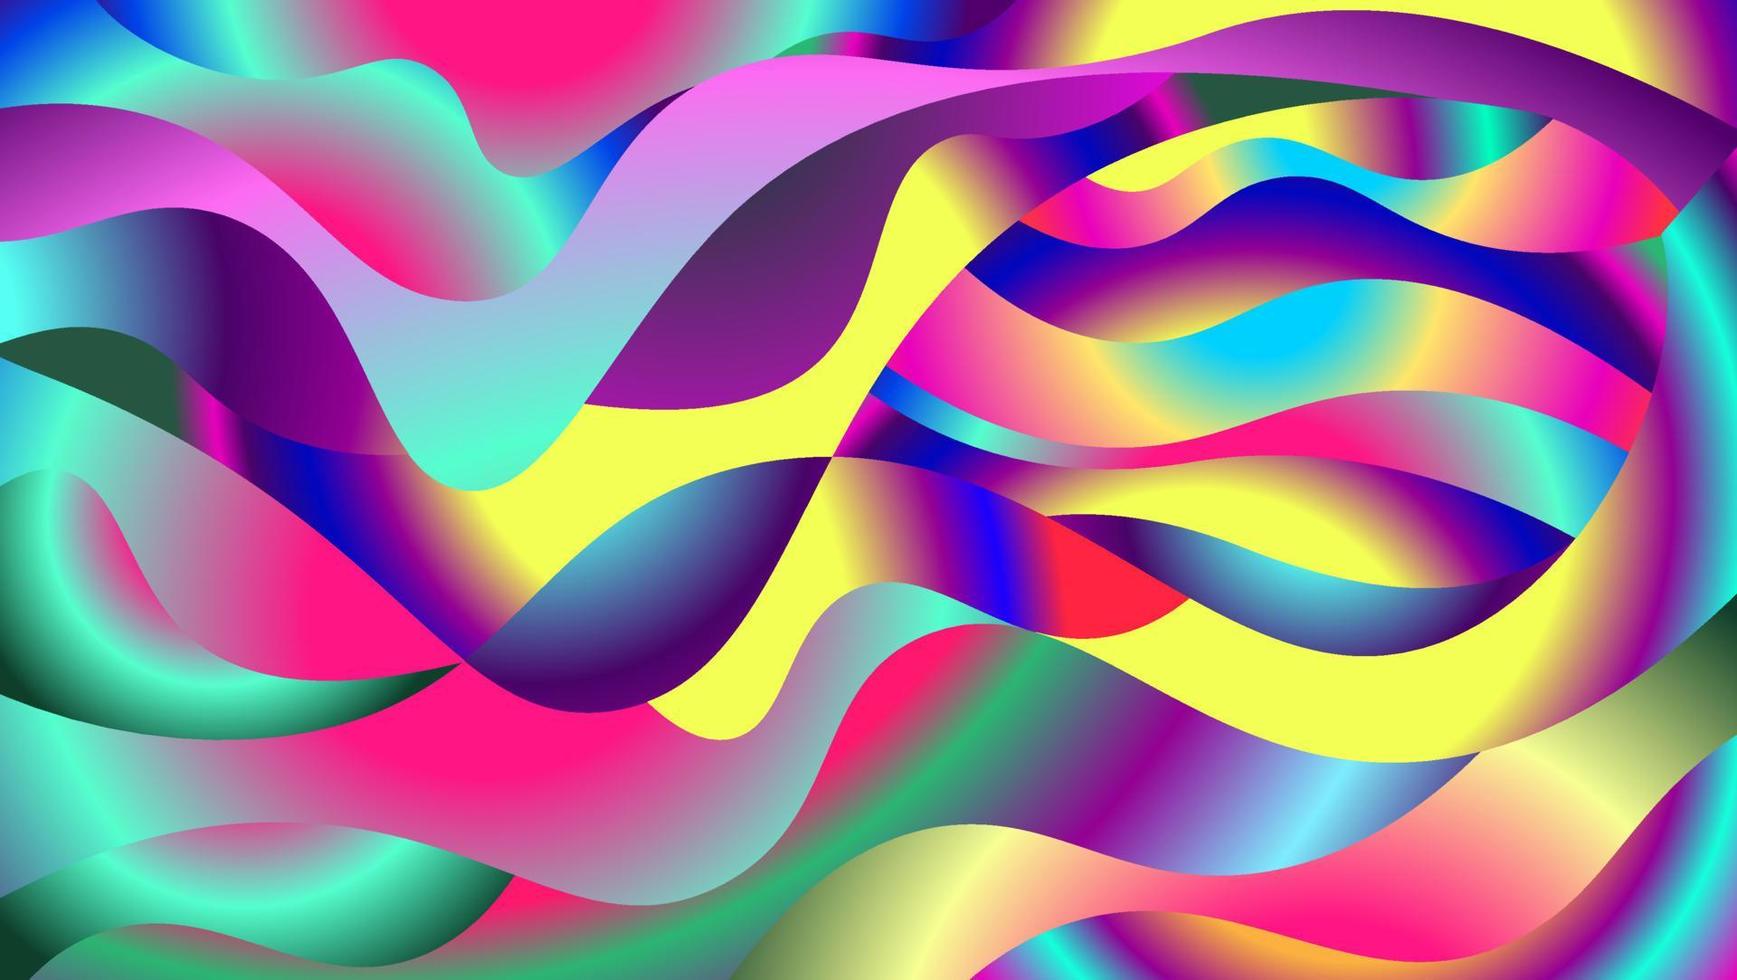 Abstract Colorful Fluid Background Design Template vector